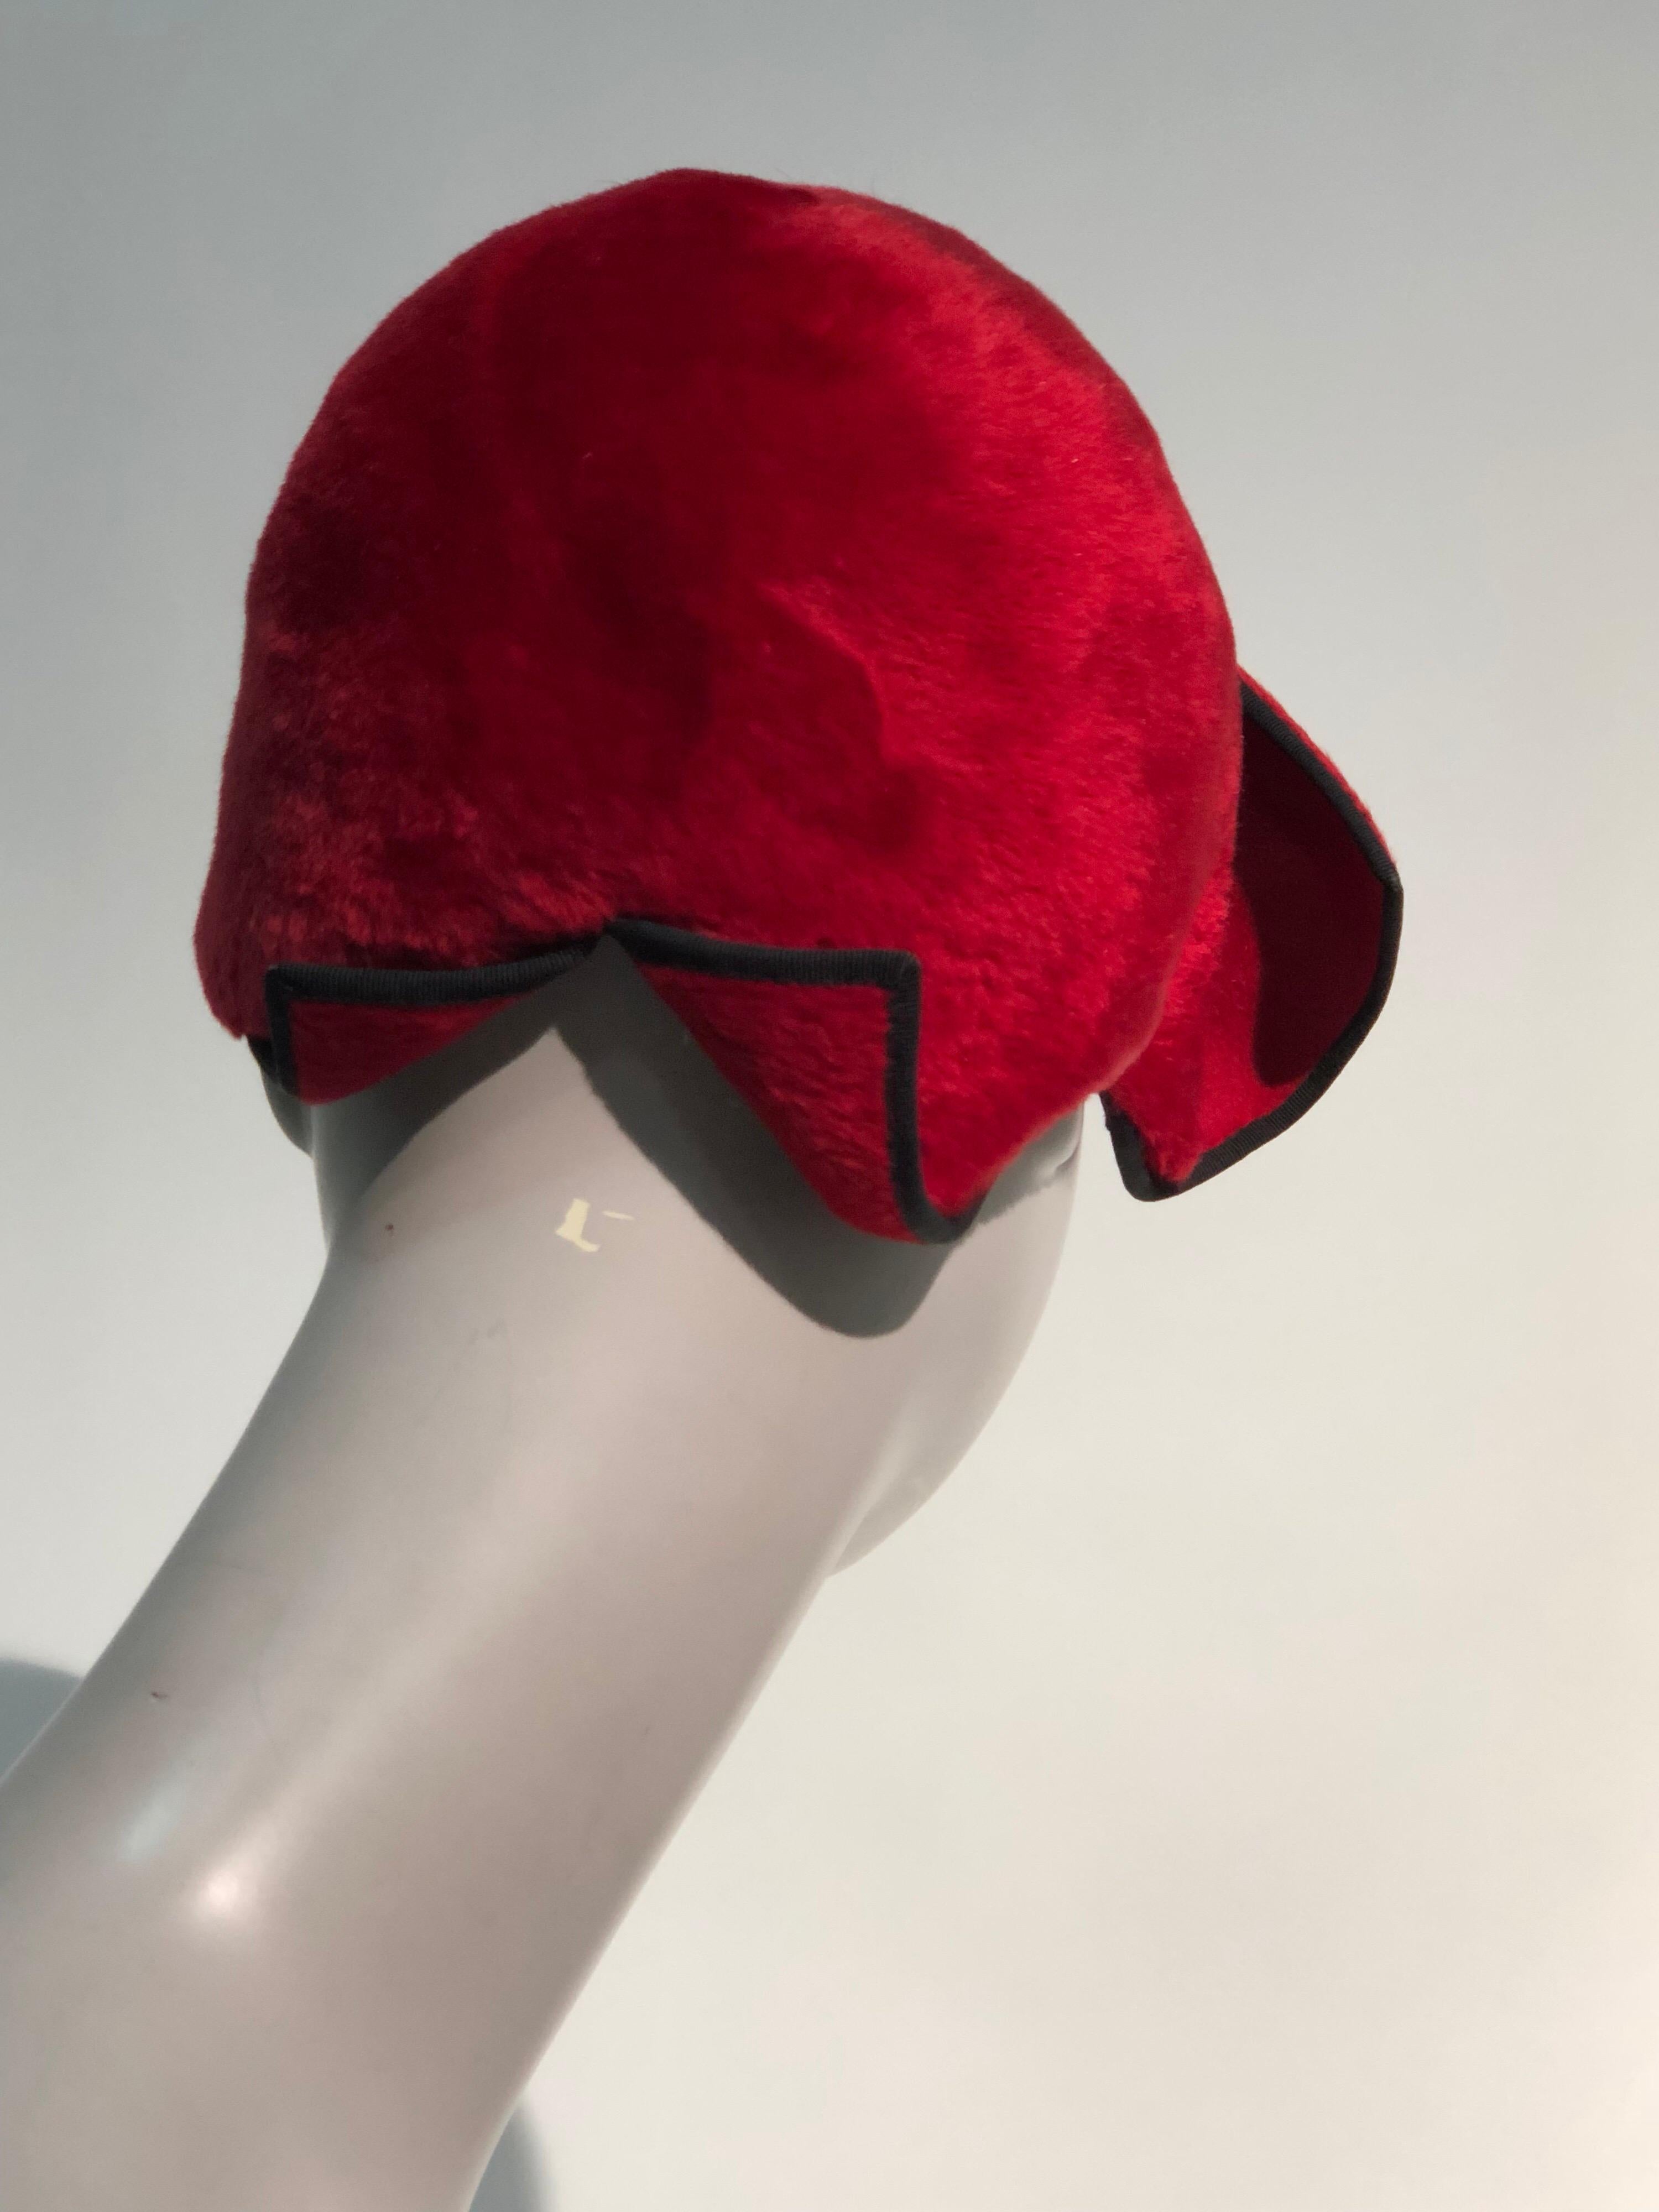 1950s John Frederics Cardinal Red Fur Felt Cloche Hat W/ Black Trim  In Excellent Condition For Sale In Gresham, OR